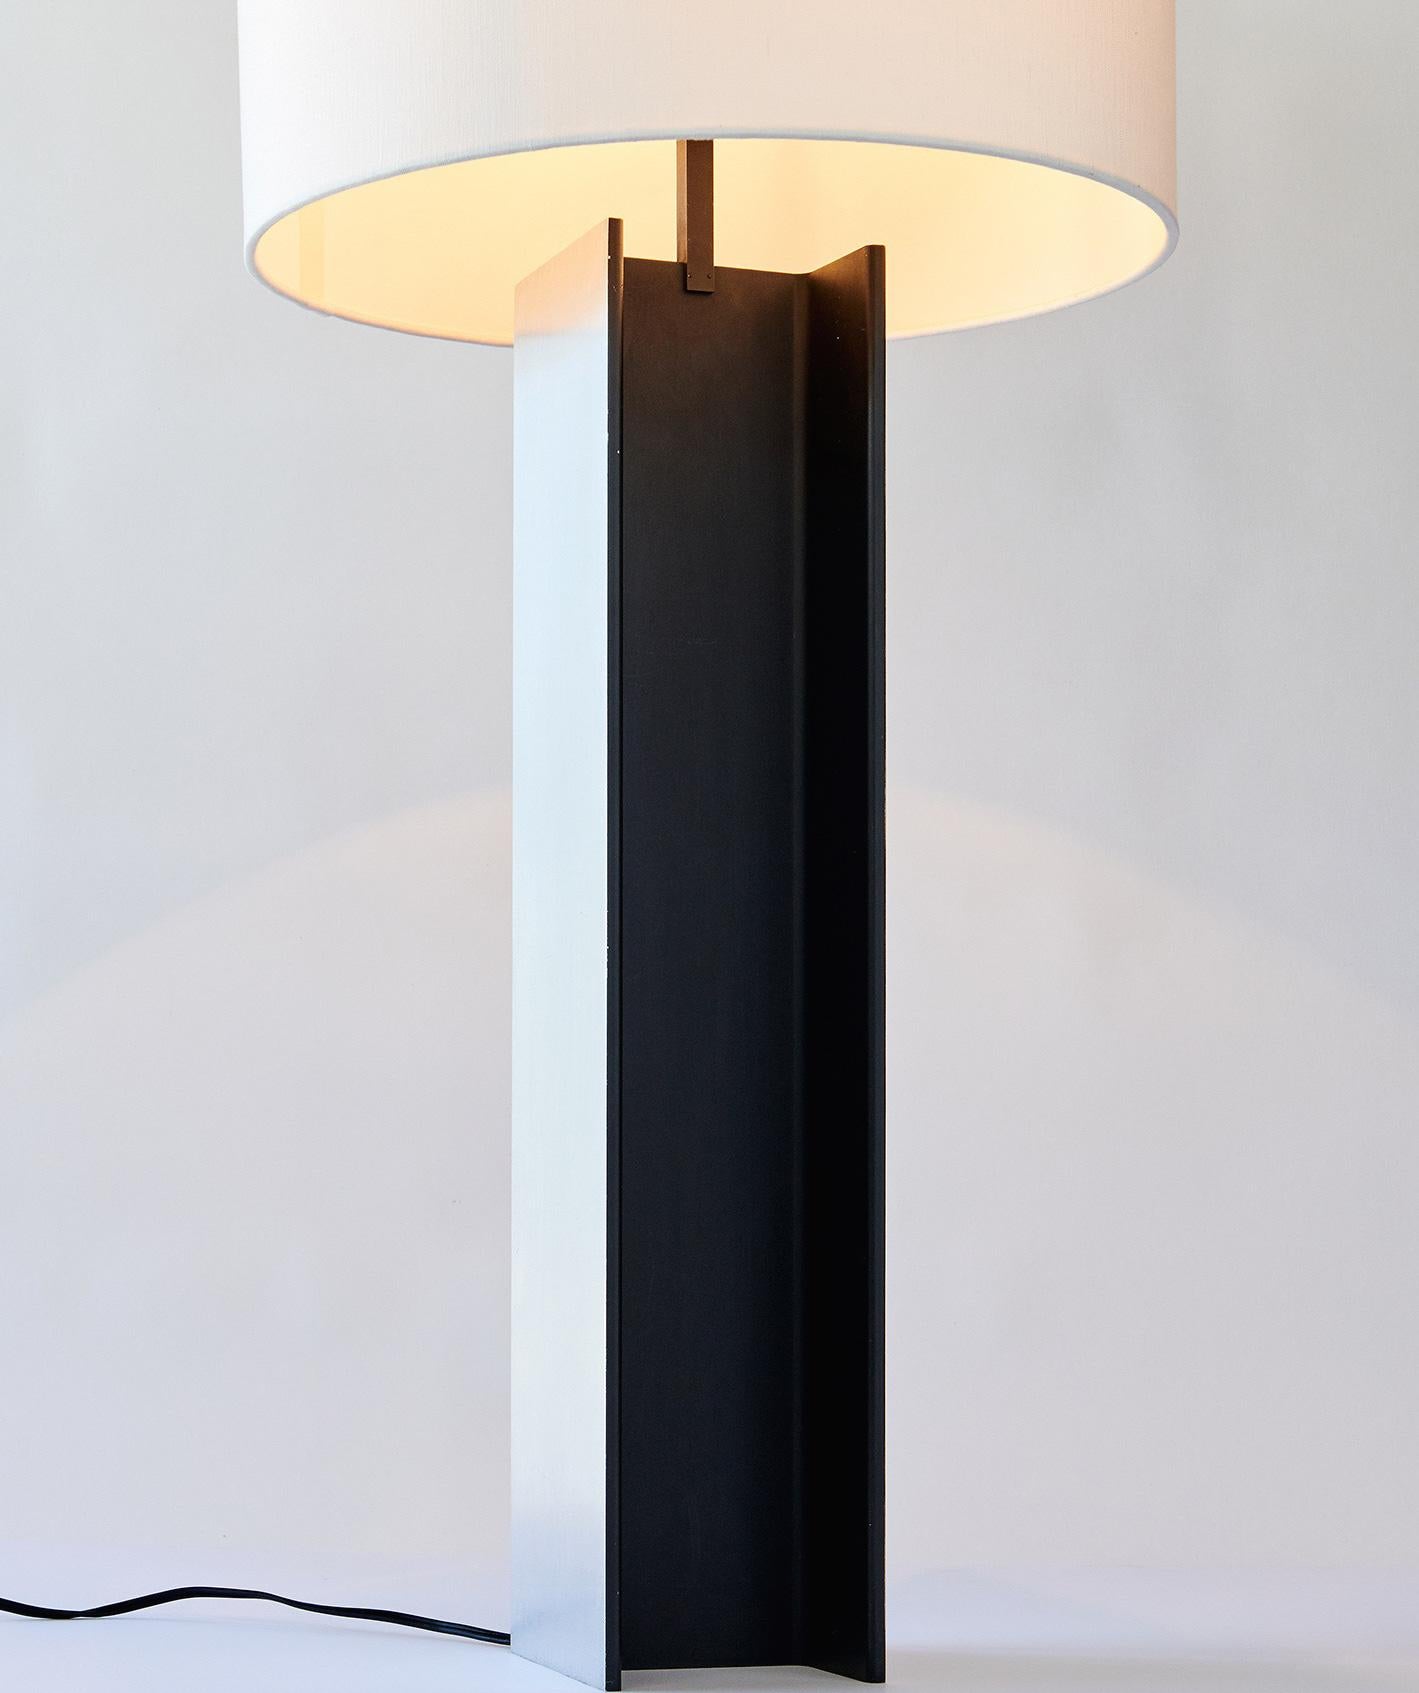 Designed in the 1960s by architect Jeff Jones for the Laurel Lamp Company, this table lamp fashioned from a section of steel I-beam has interesting affinities to the work of Enzo Mari (see elsewhere in my inventory) and, of course, the sculpture of